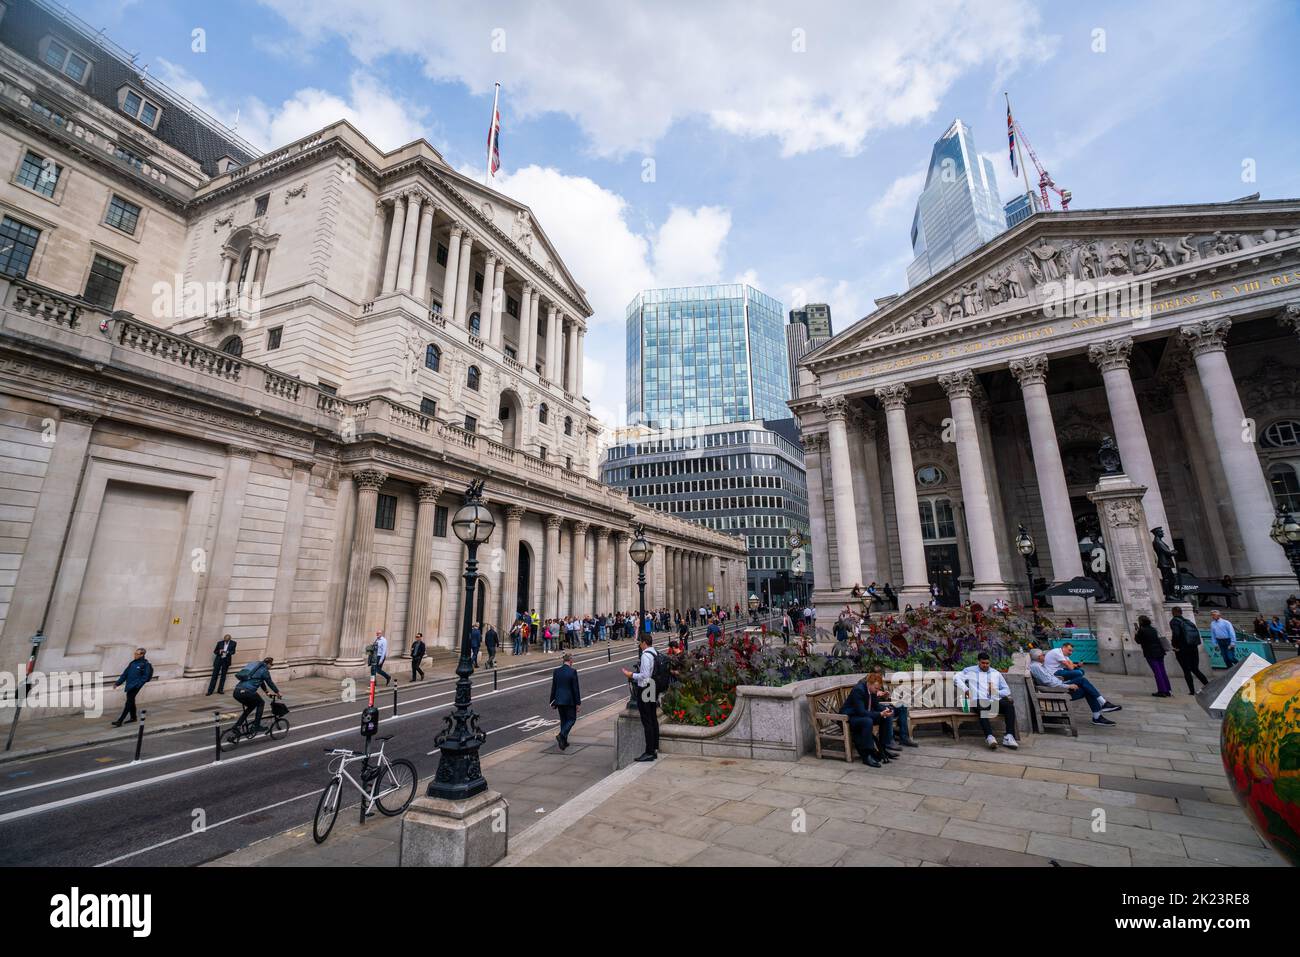 London UK. 22 September 2022.  A general view of Bank of England in Threadneedle street. The monetary committee of the Bank of England has announced  a rise in UK interest rates  from 1.75% to 2.25%  the highest increase  in a  14-year  period in order to slow down the soaring inflation affecting the cost of living. Credit: amer ghazzal/Alamy Live News. Stock Photo